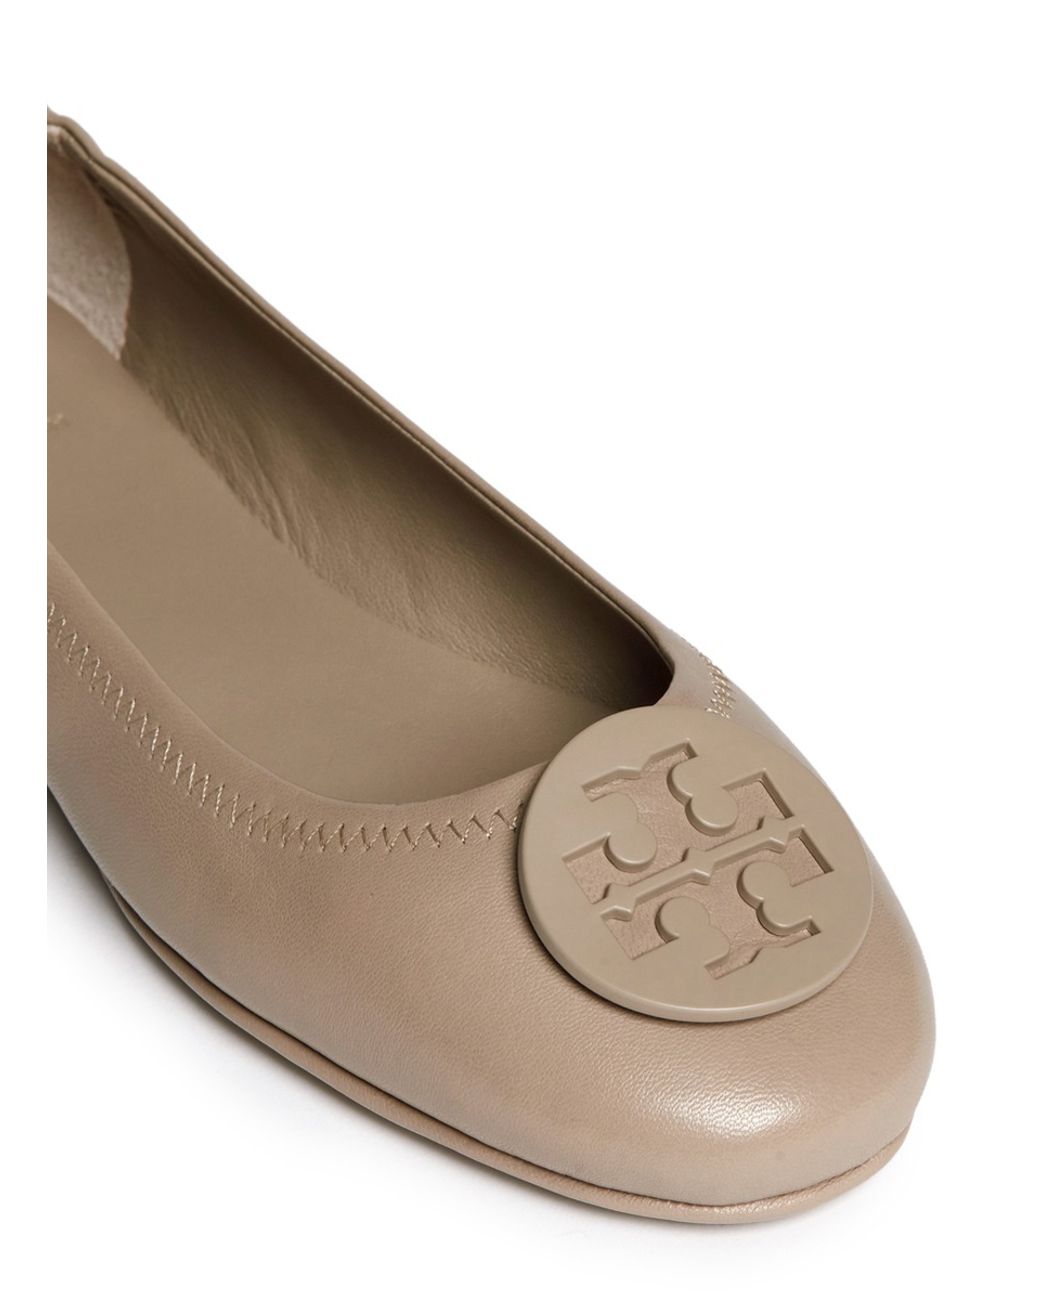 Tory Burch 'minnie Travel' Leather Ballet Flats in Gray | Lyst